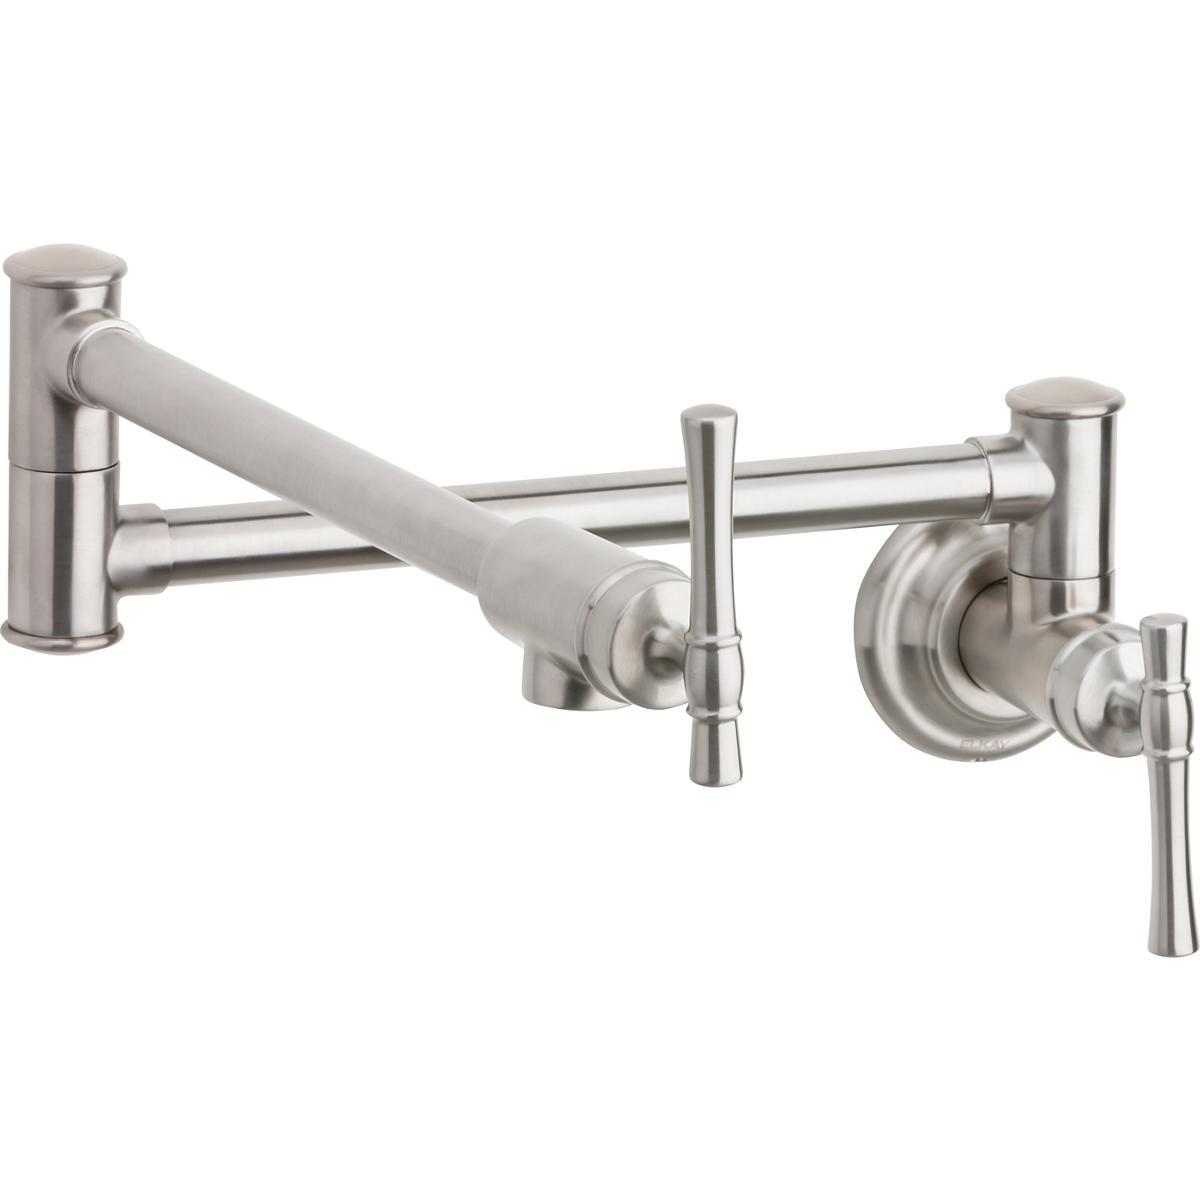 Elkay Explore Wall Mount Single Hole Pot Filler Kitchen Faucet with Lever Handles-DirectSinks